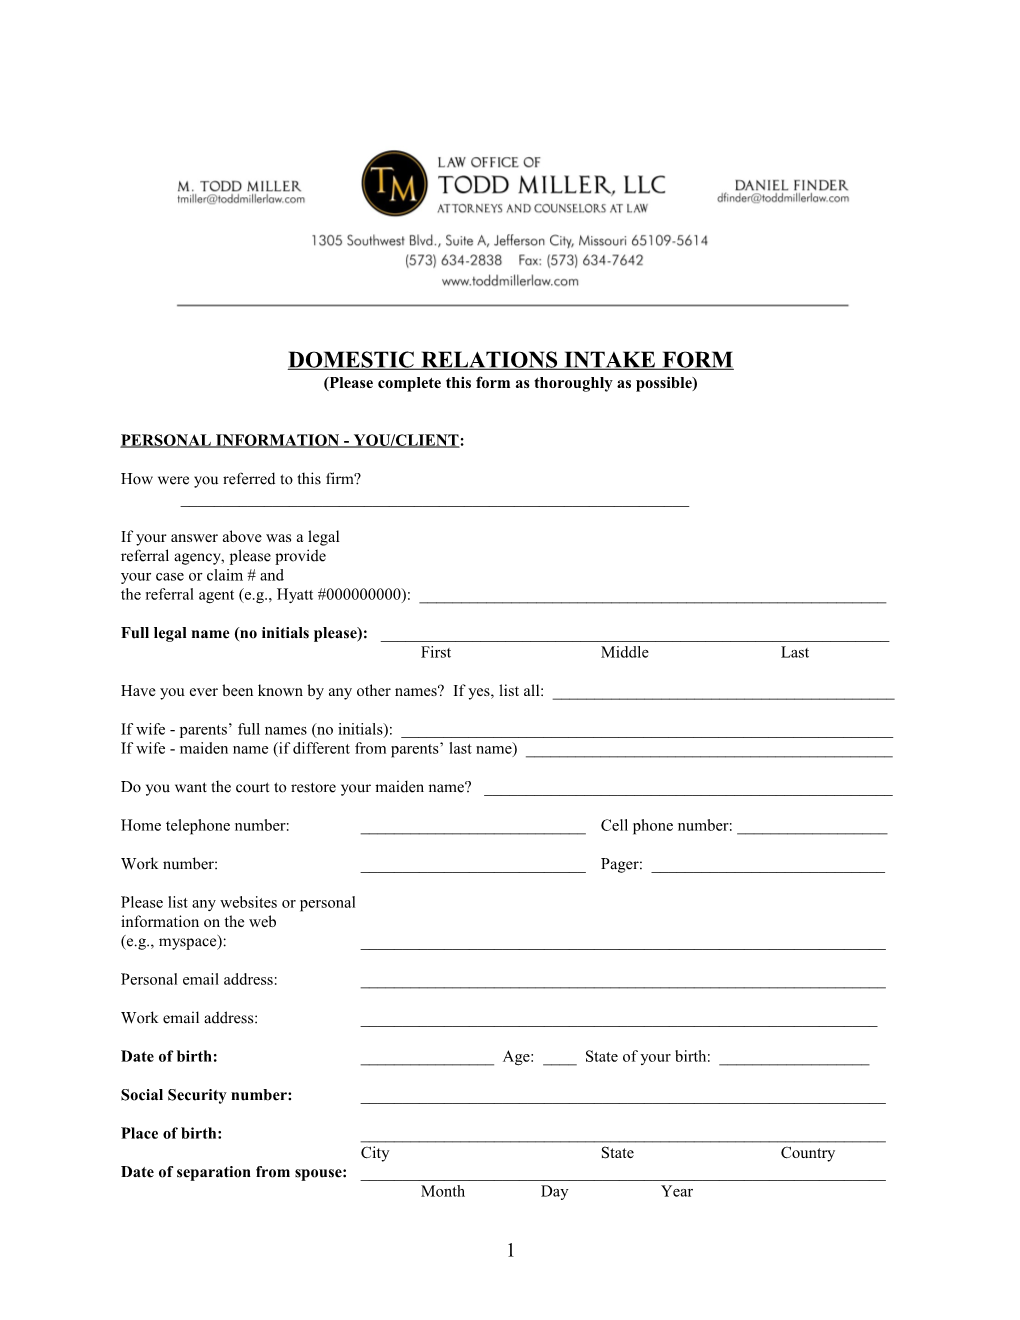 Domestic Relations Intake Form